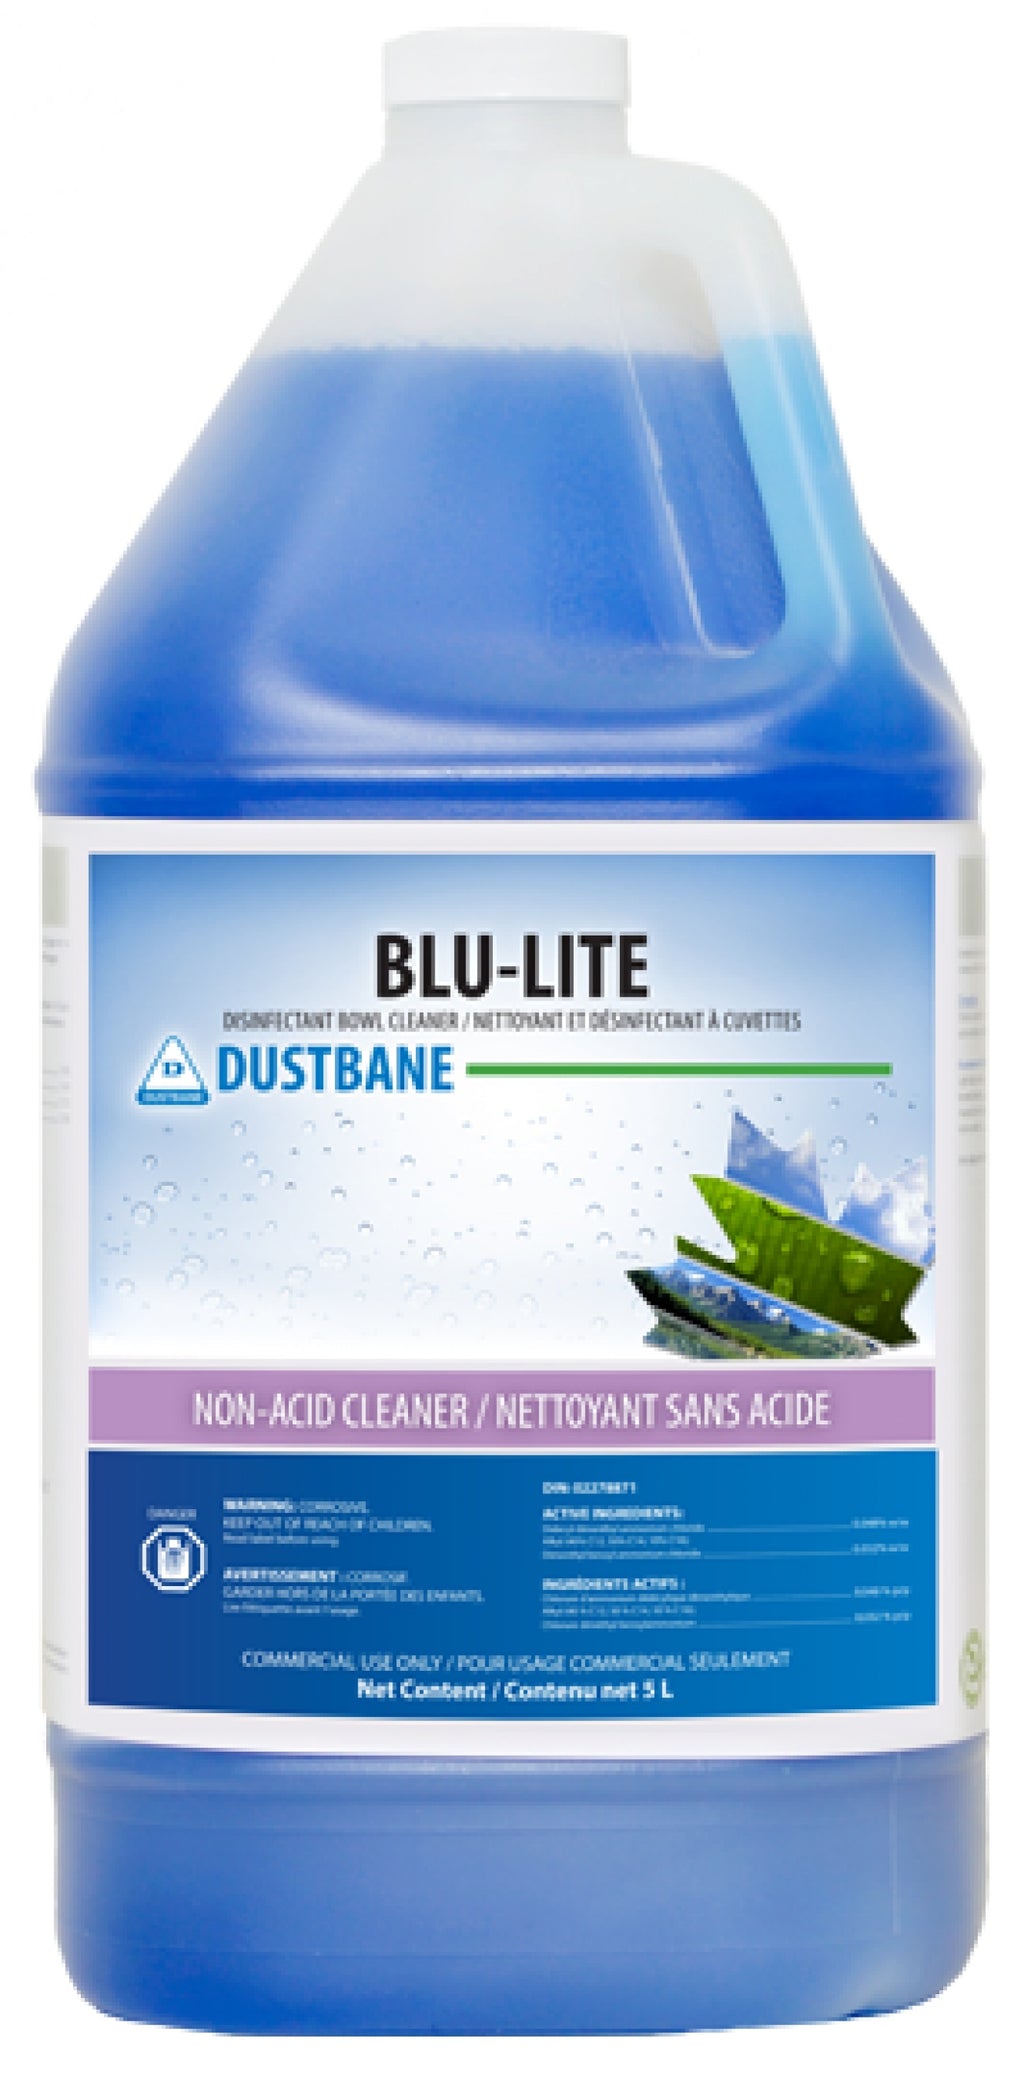 5L DUSTBANE® BLU-LITE NON-ACID DISINFECTING BOWL CLEANER, CONCENTRATE